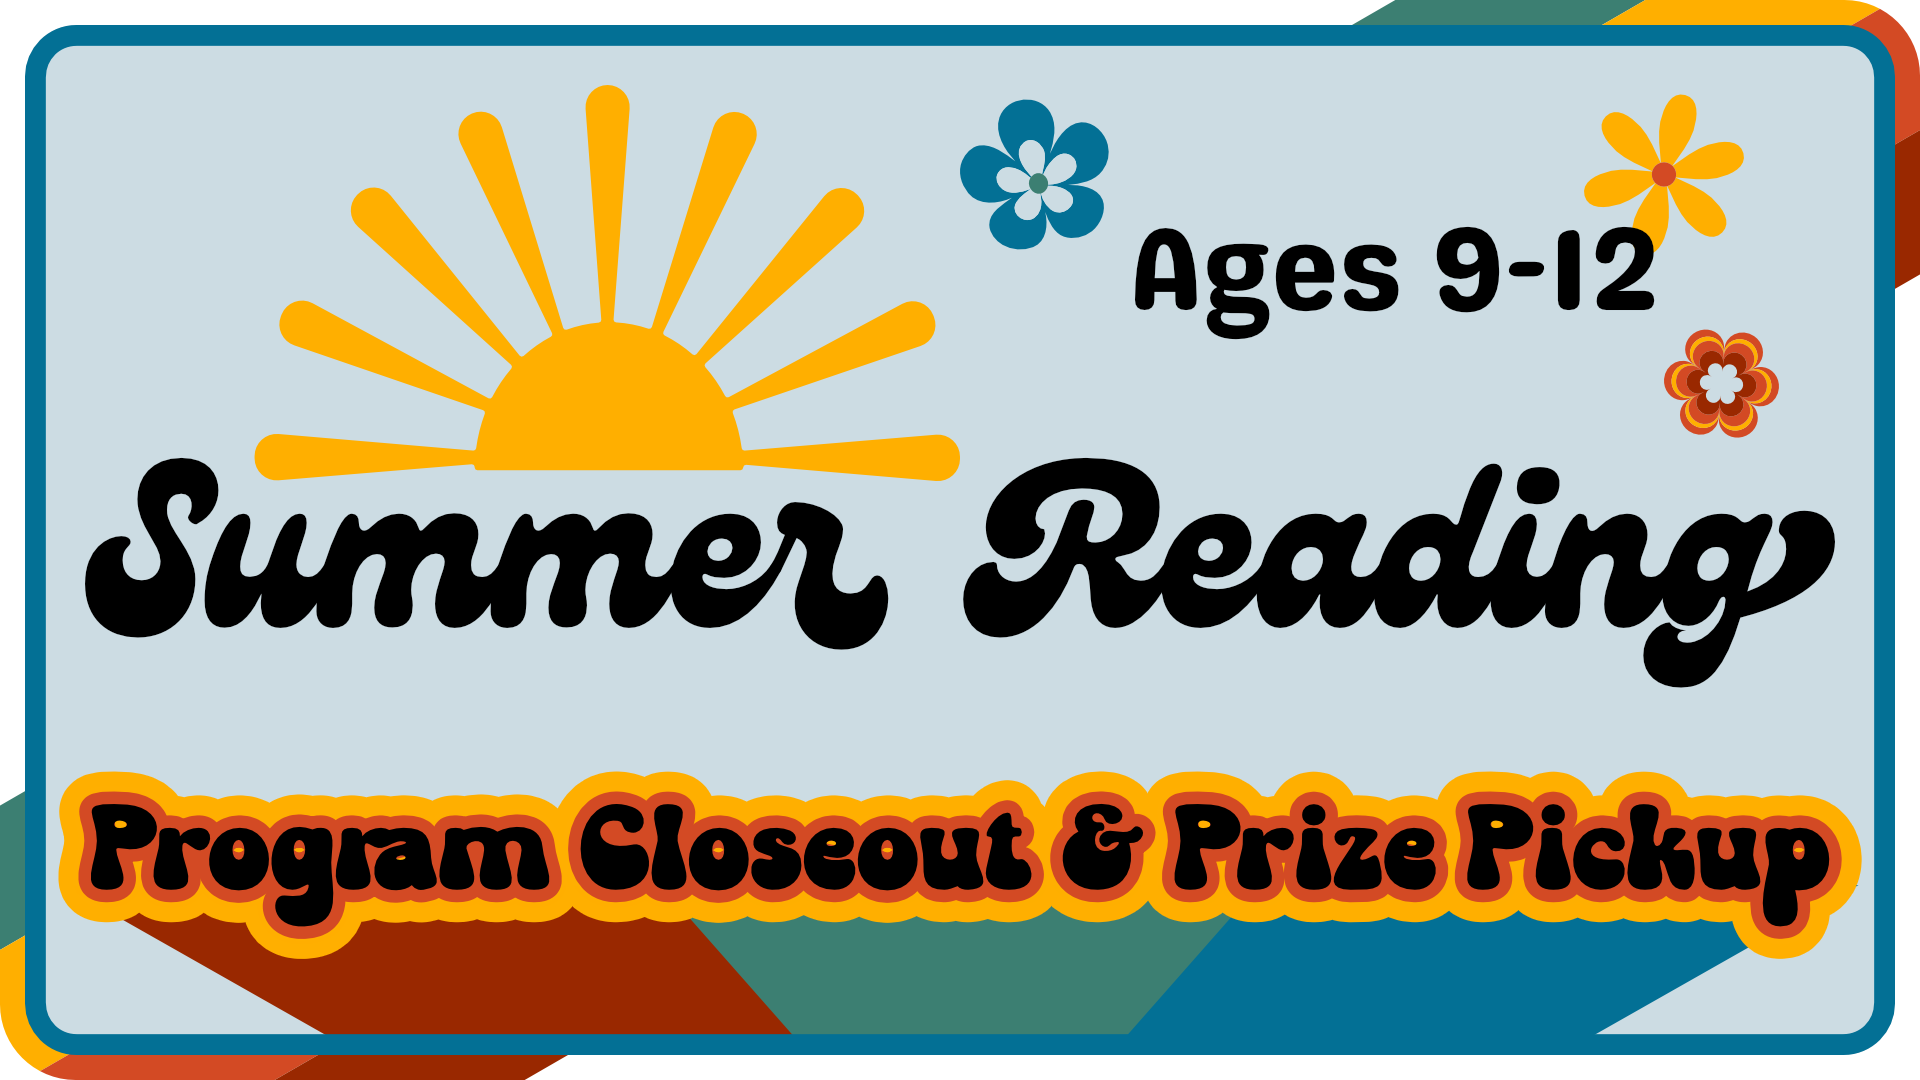 Summer Reading program closeout and prize pickup for ages 9-12